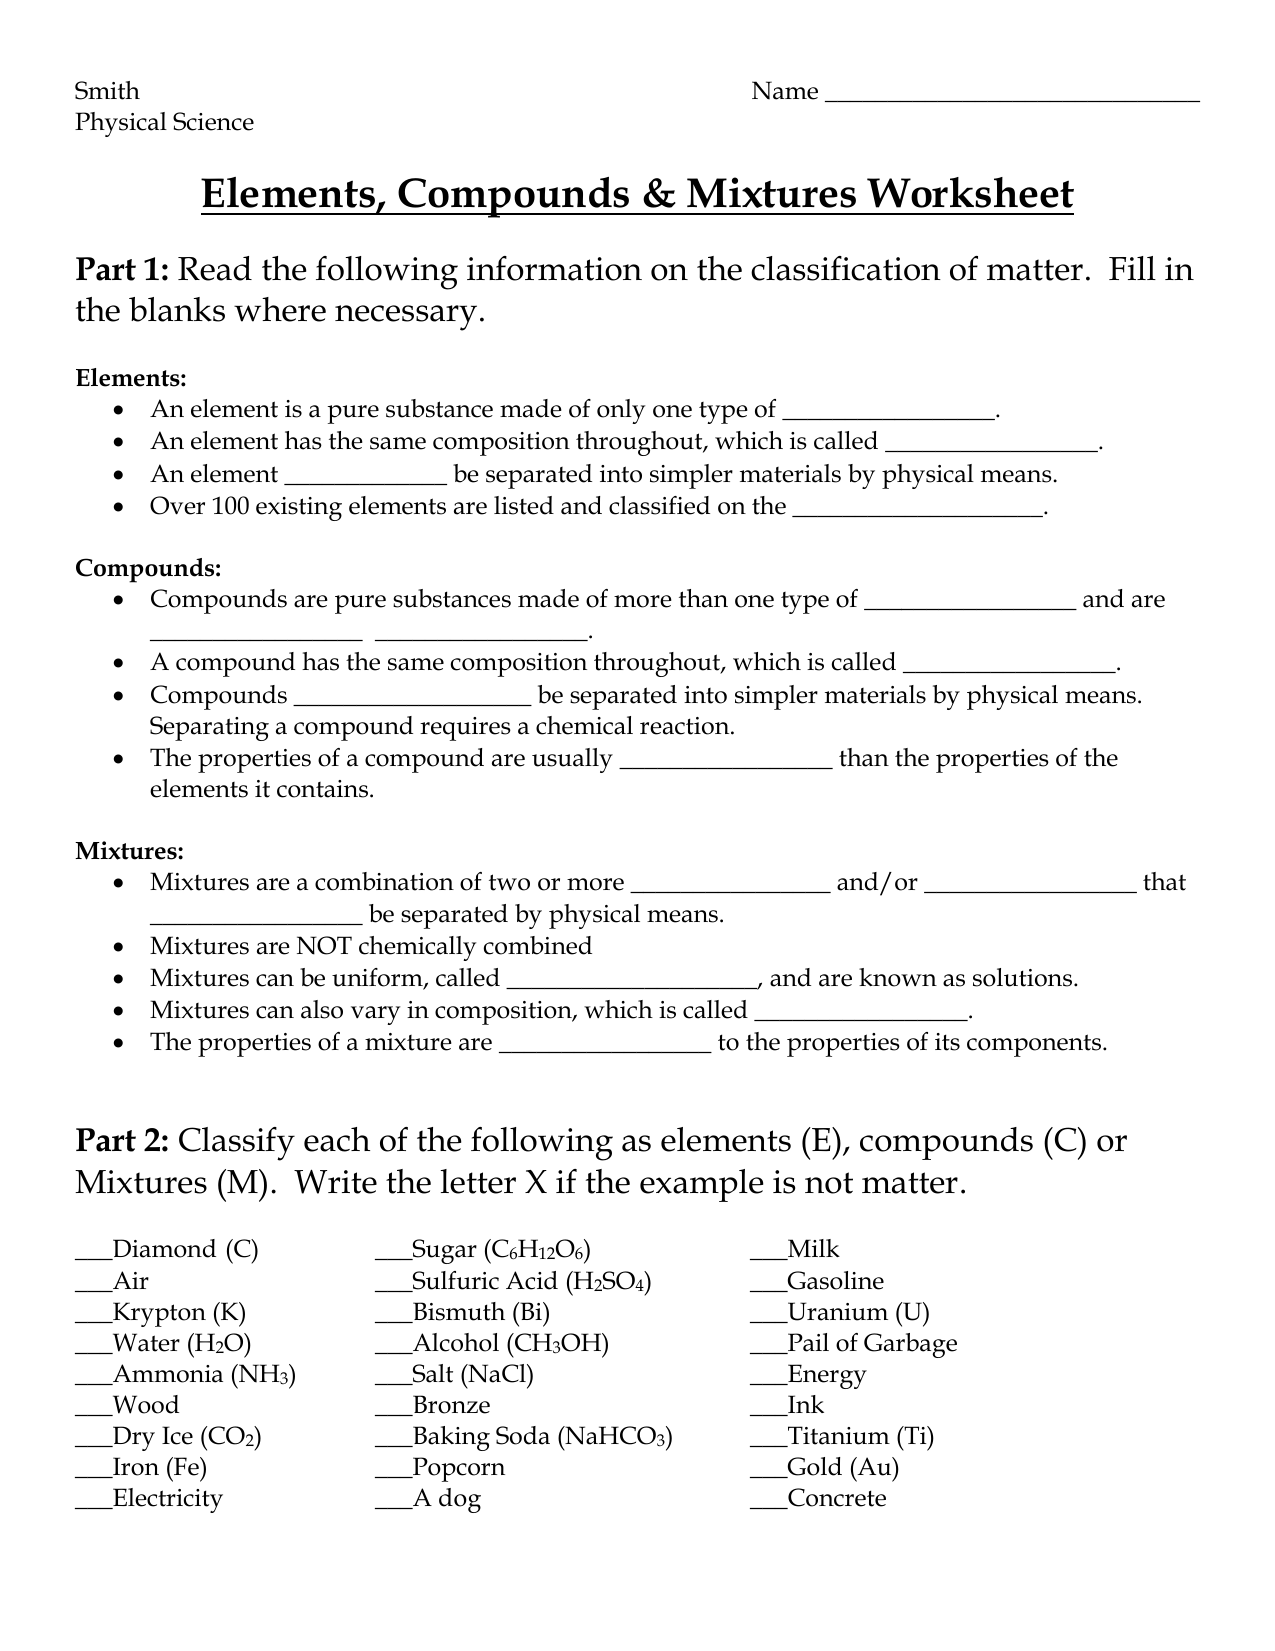 Elements, Compounds & Mixtures Worksheet In Element Compound Mixture Worksheet